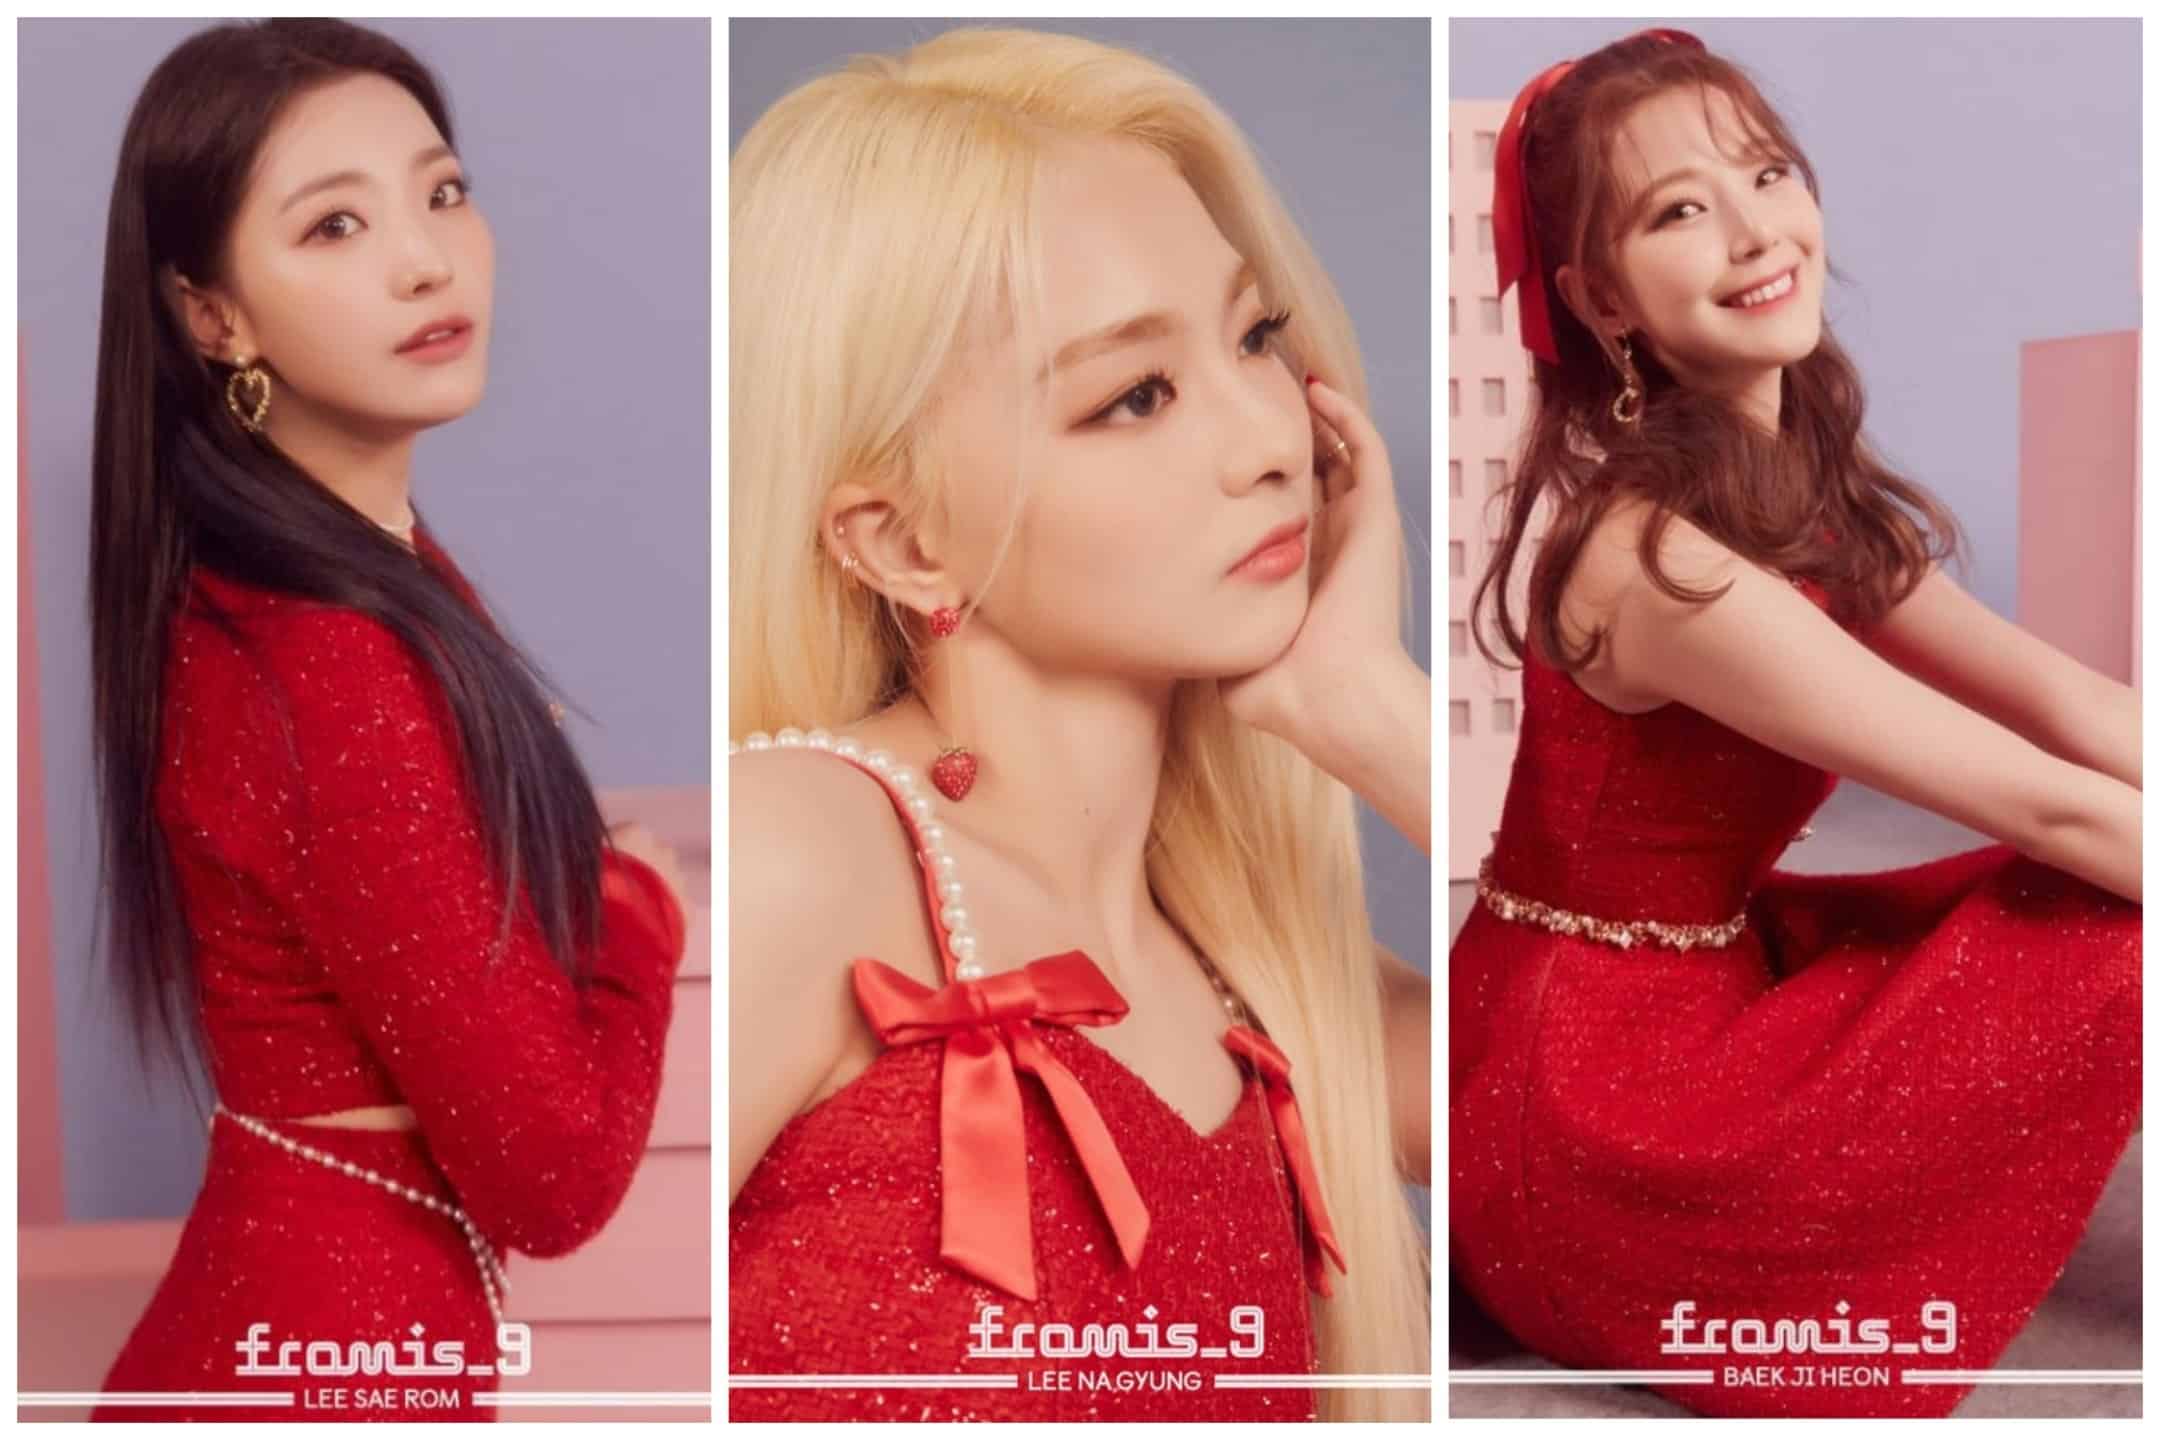 Fromis_9 Members part of the dance collab 